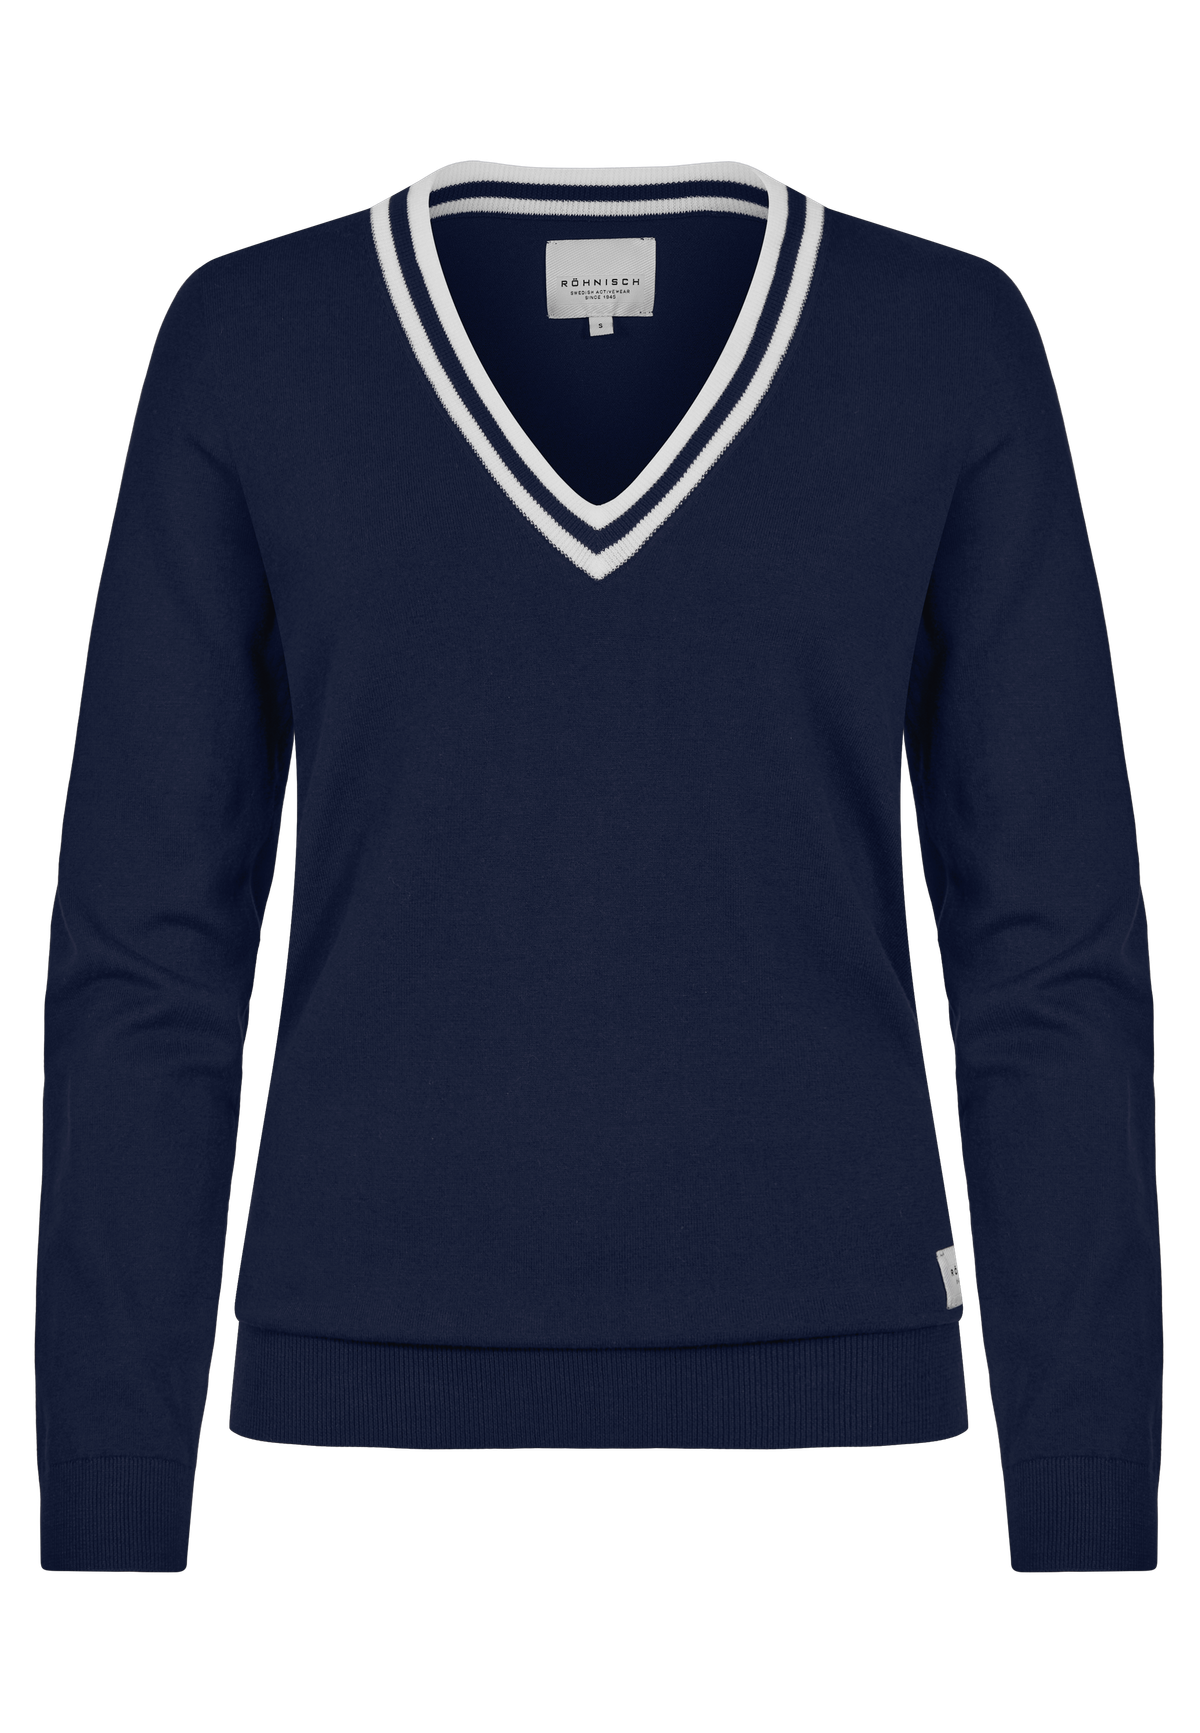 Adele Knitted Sweater, Navy/White